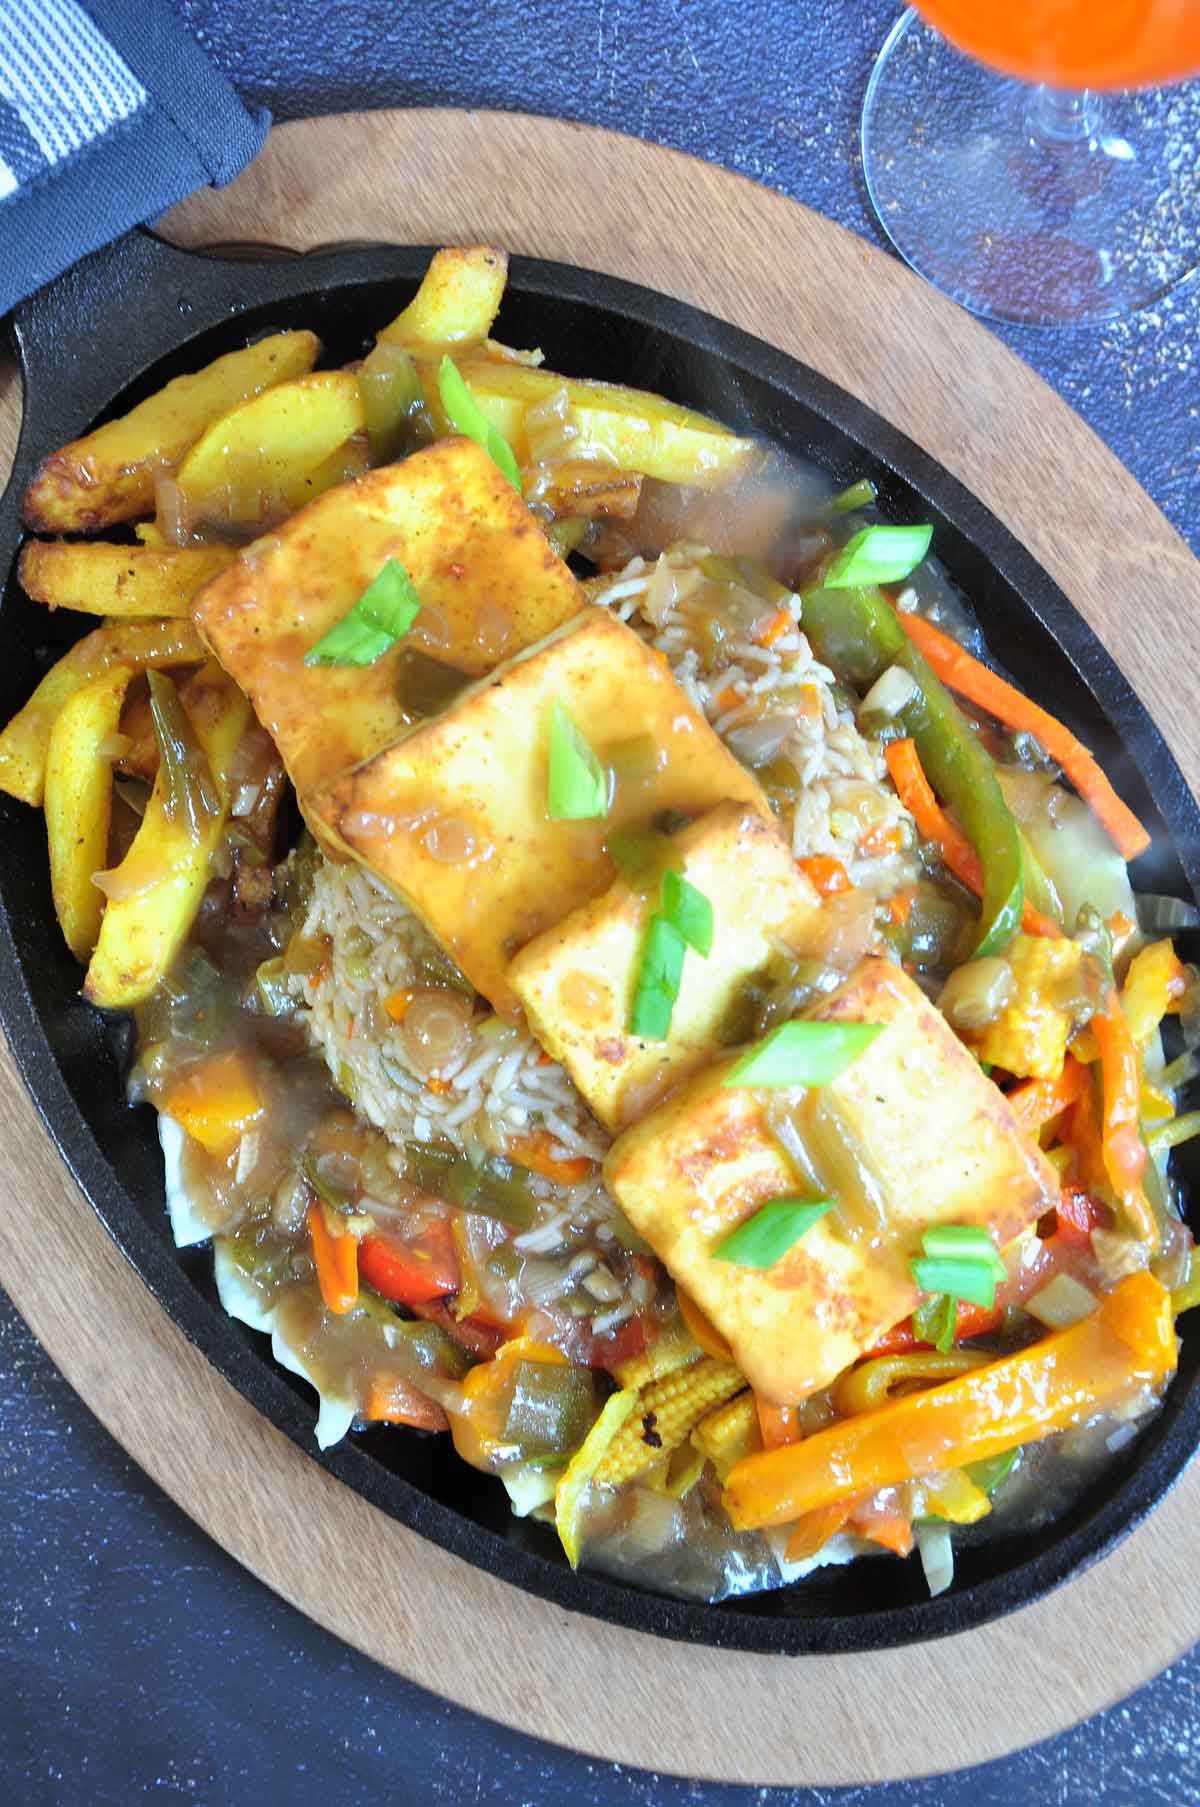 Veg paneer sizzler served on a iron sizzler plate.